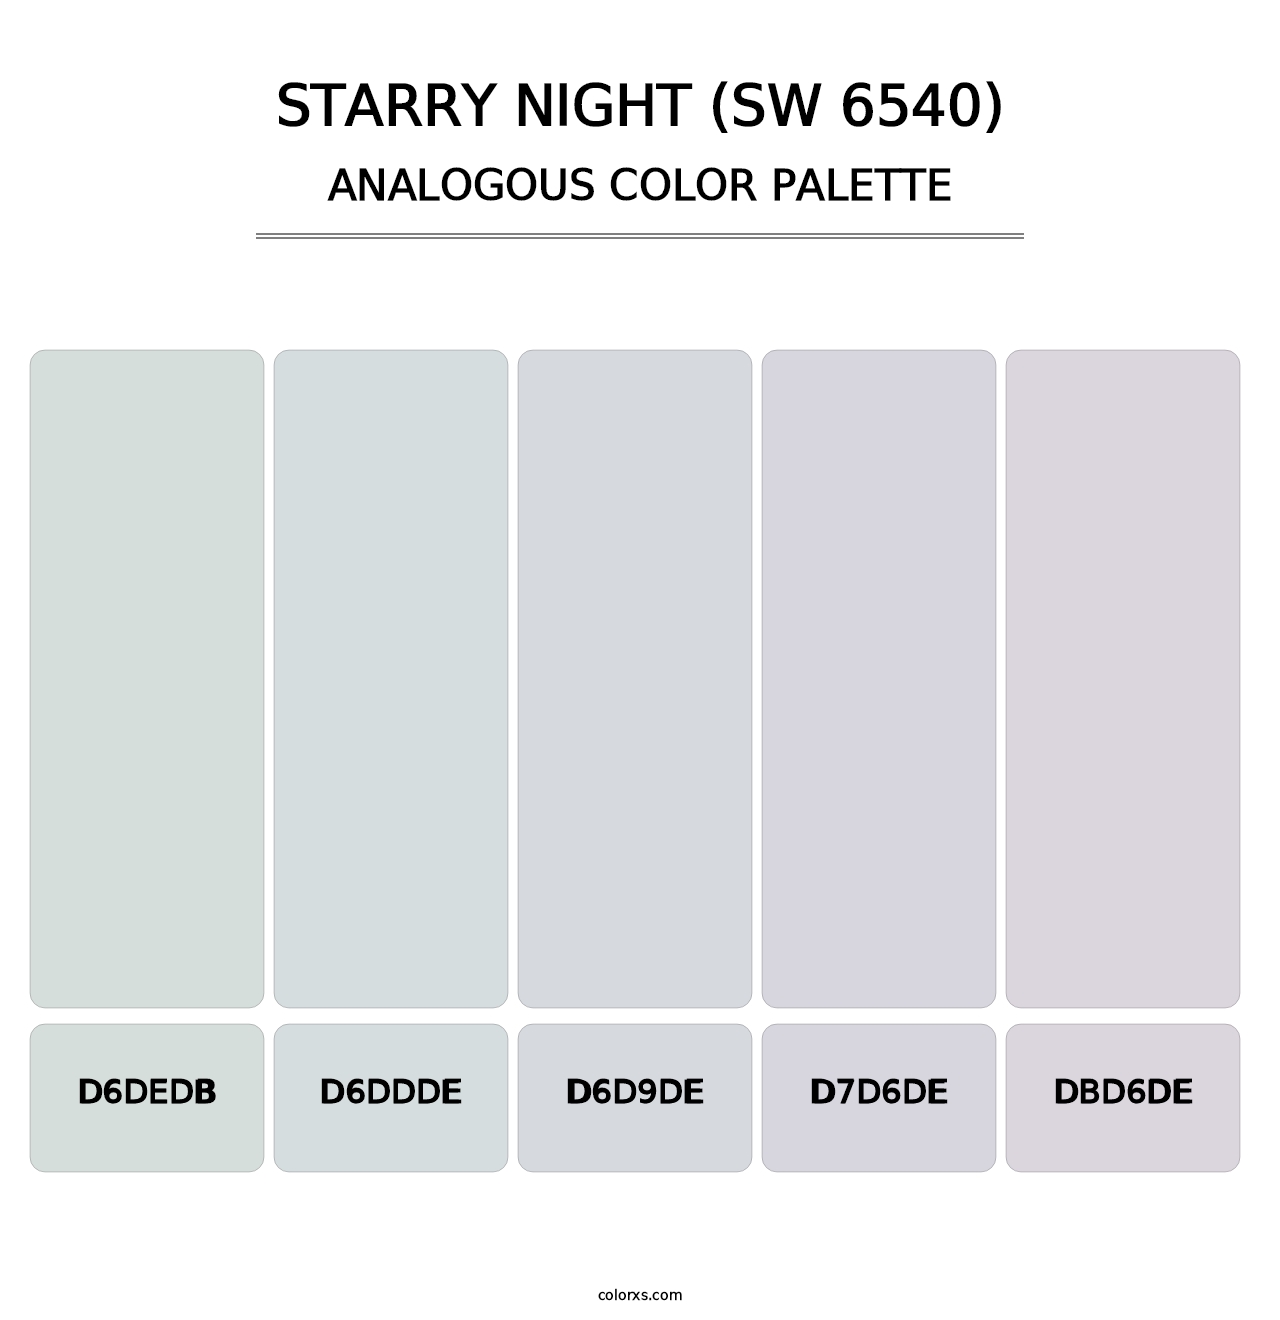 Starry Night (SW 6540) - Analogous Color Palette